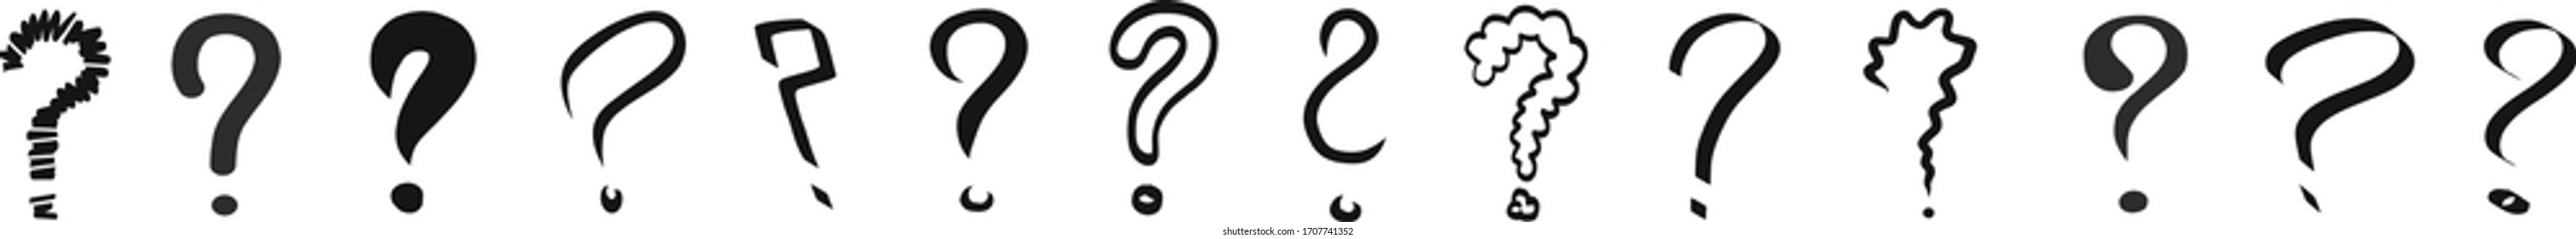 question mark drawings interrogation points queries hand drawn vector illustration svg